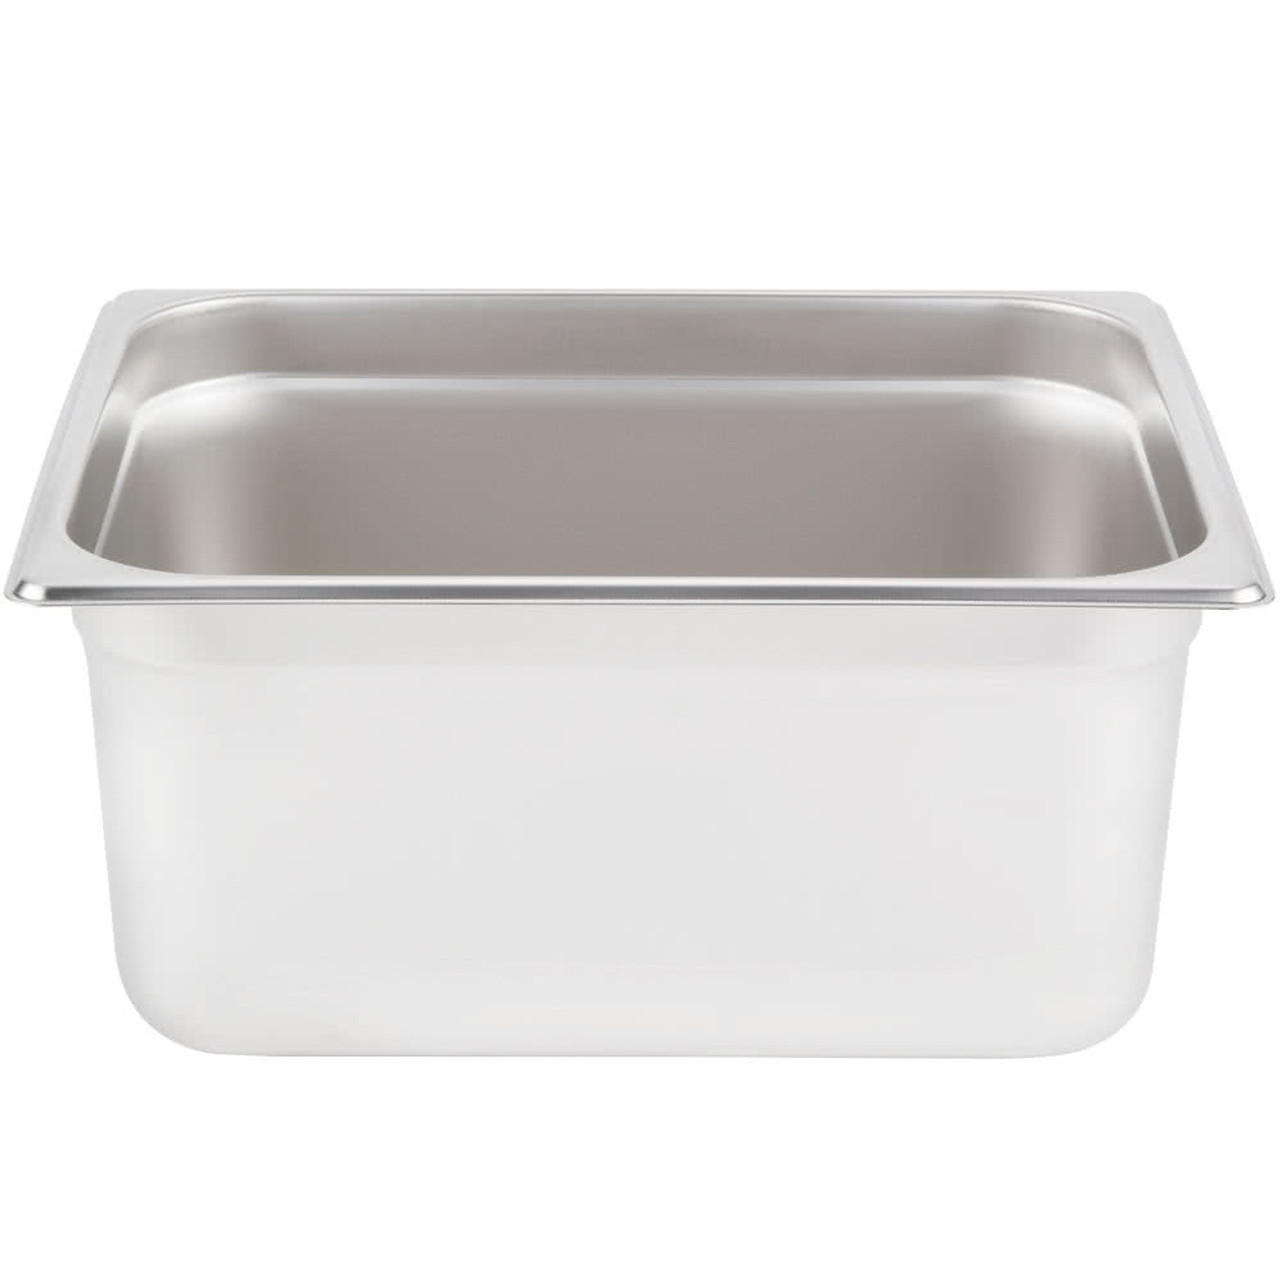 Standard Weight Anti-Jam Stainless Steel Steam Table / Hotel Pan - 6" Deep-1/2 Size 